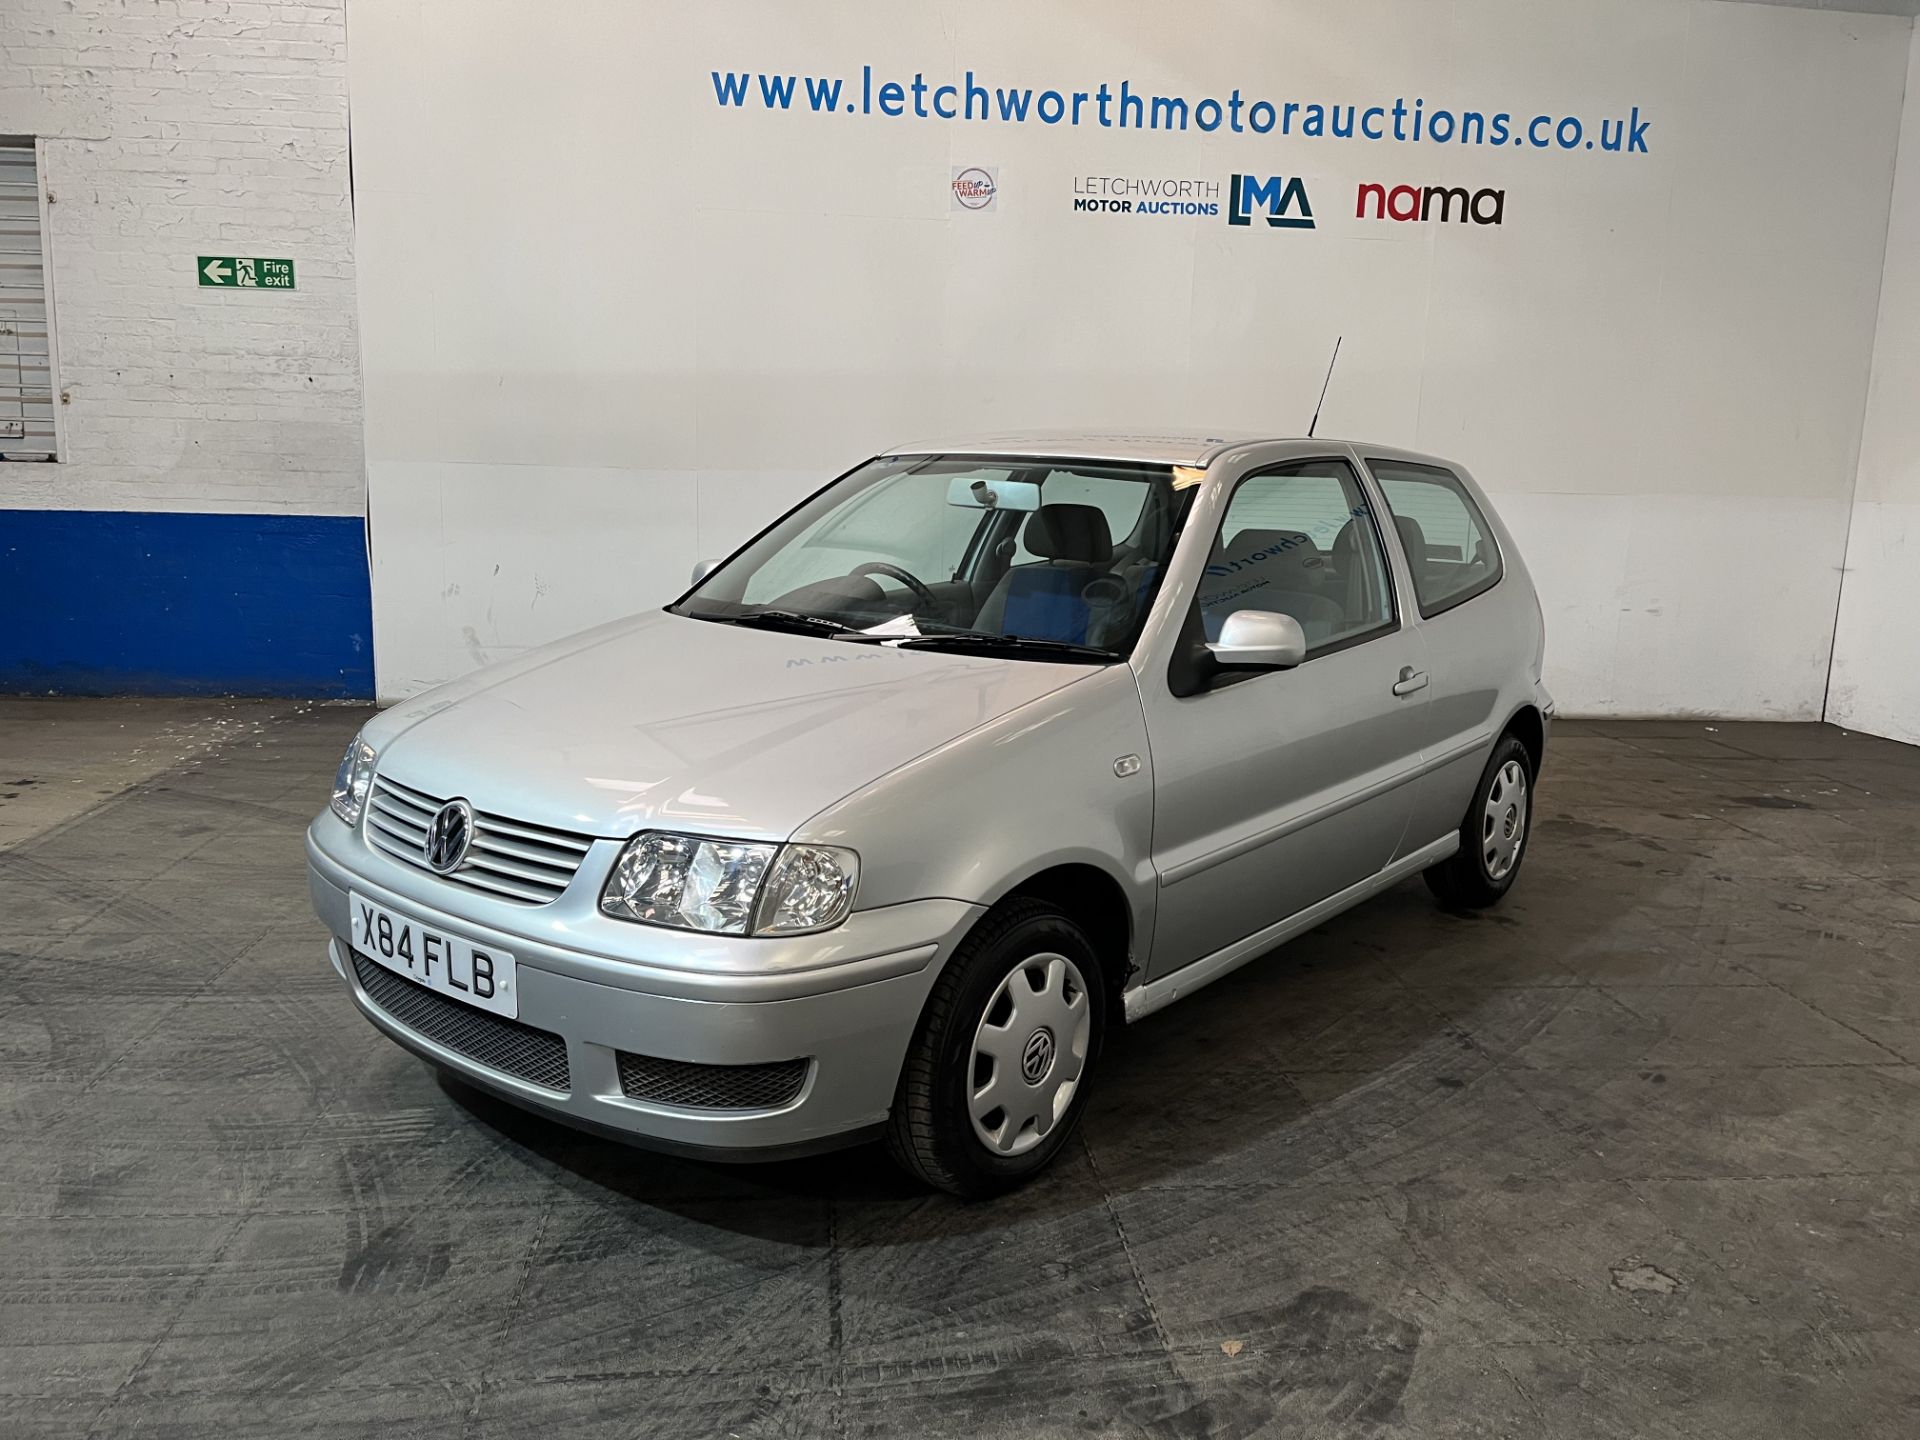 2000 Volkswagen Polo S - 1390cc - Image 3 of 16